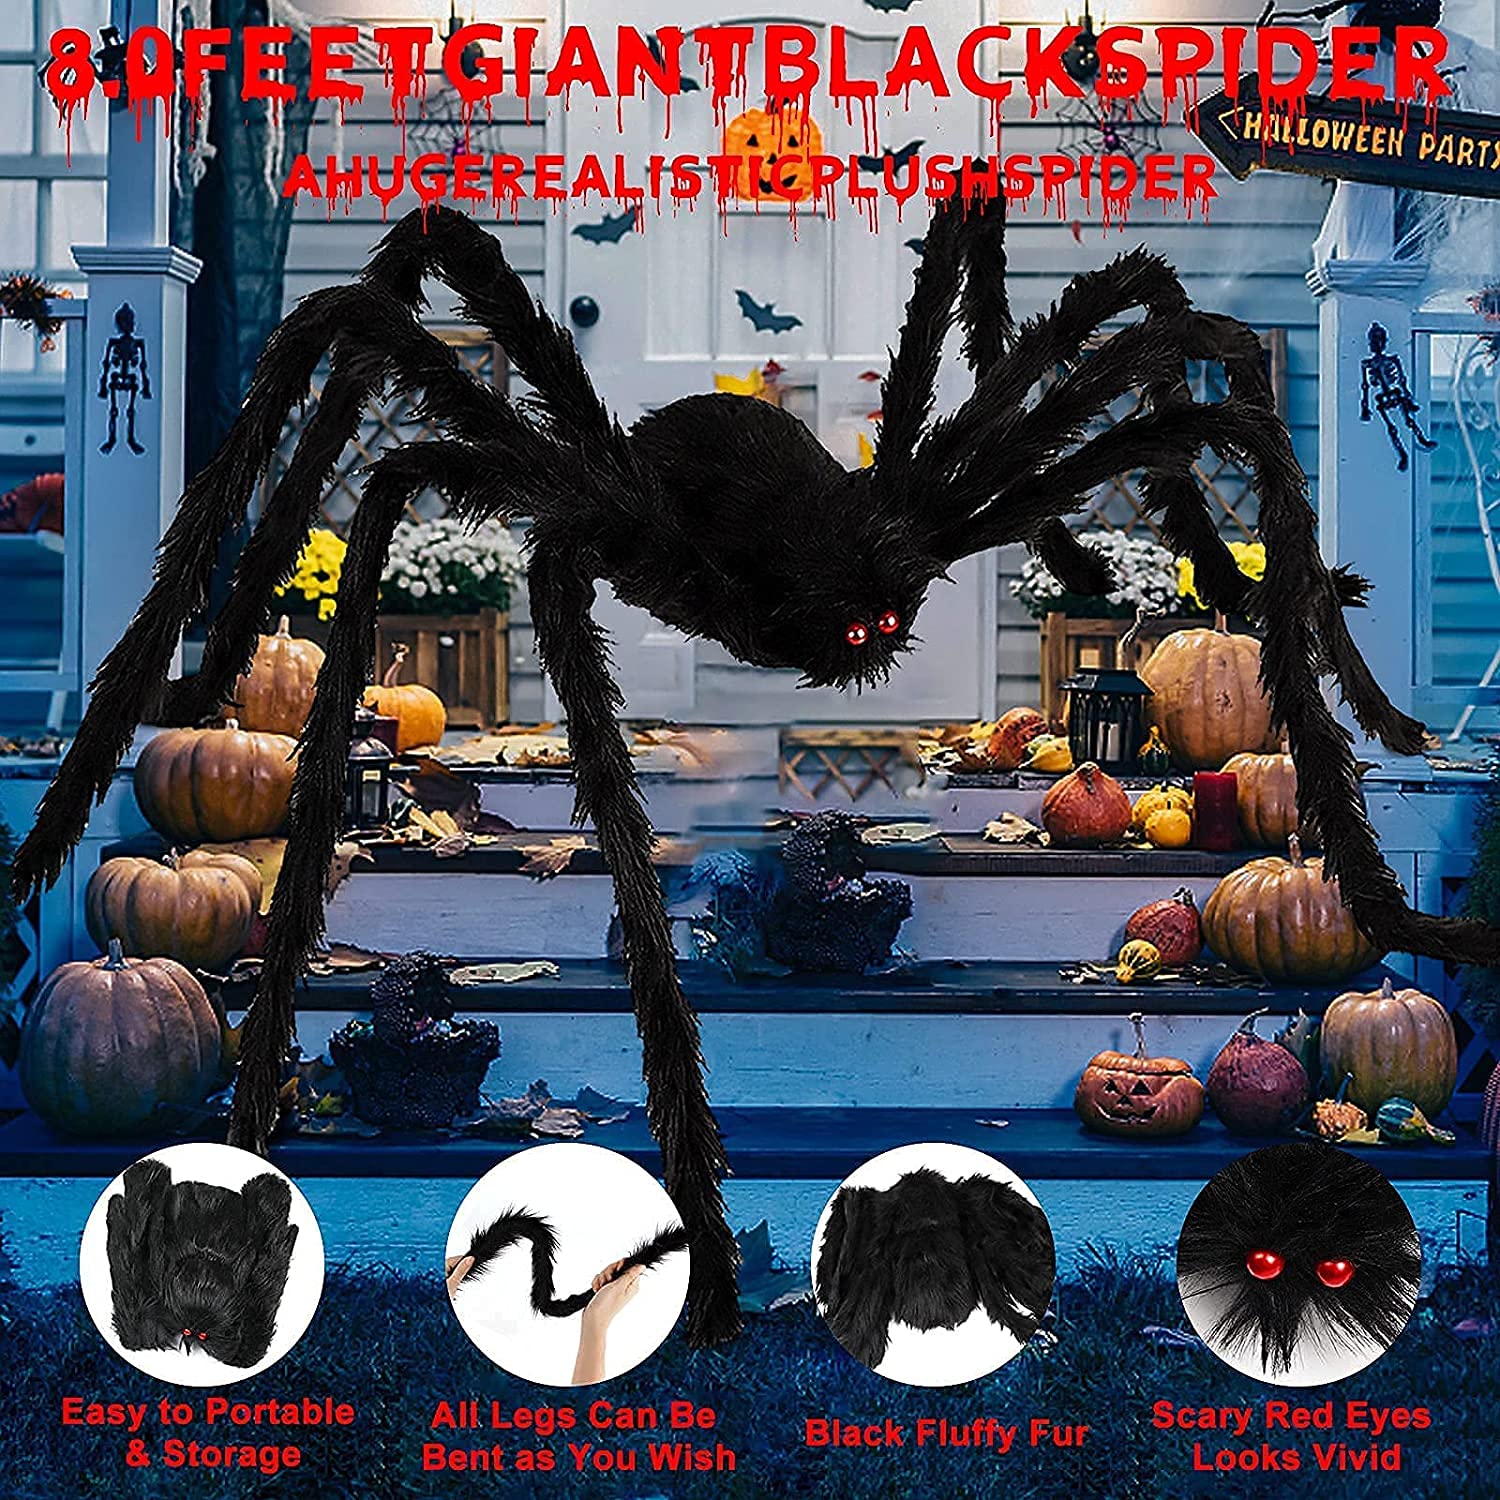 Chermory 8.2FT/98IN/250CM Halloween Giant Spider Decorations, Large Fake Scary Hairy Spider,Halloween Huge Plush Toy Spider Props Toy for Indoor Outdoor Creepy Lawn Garden Decor Black